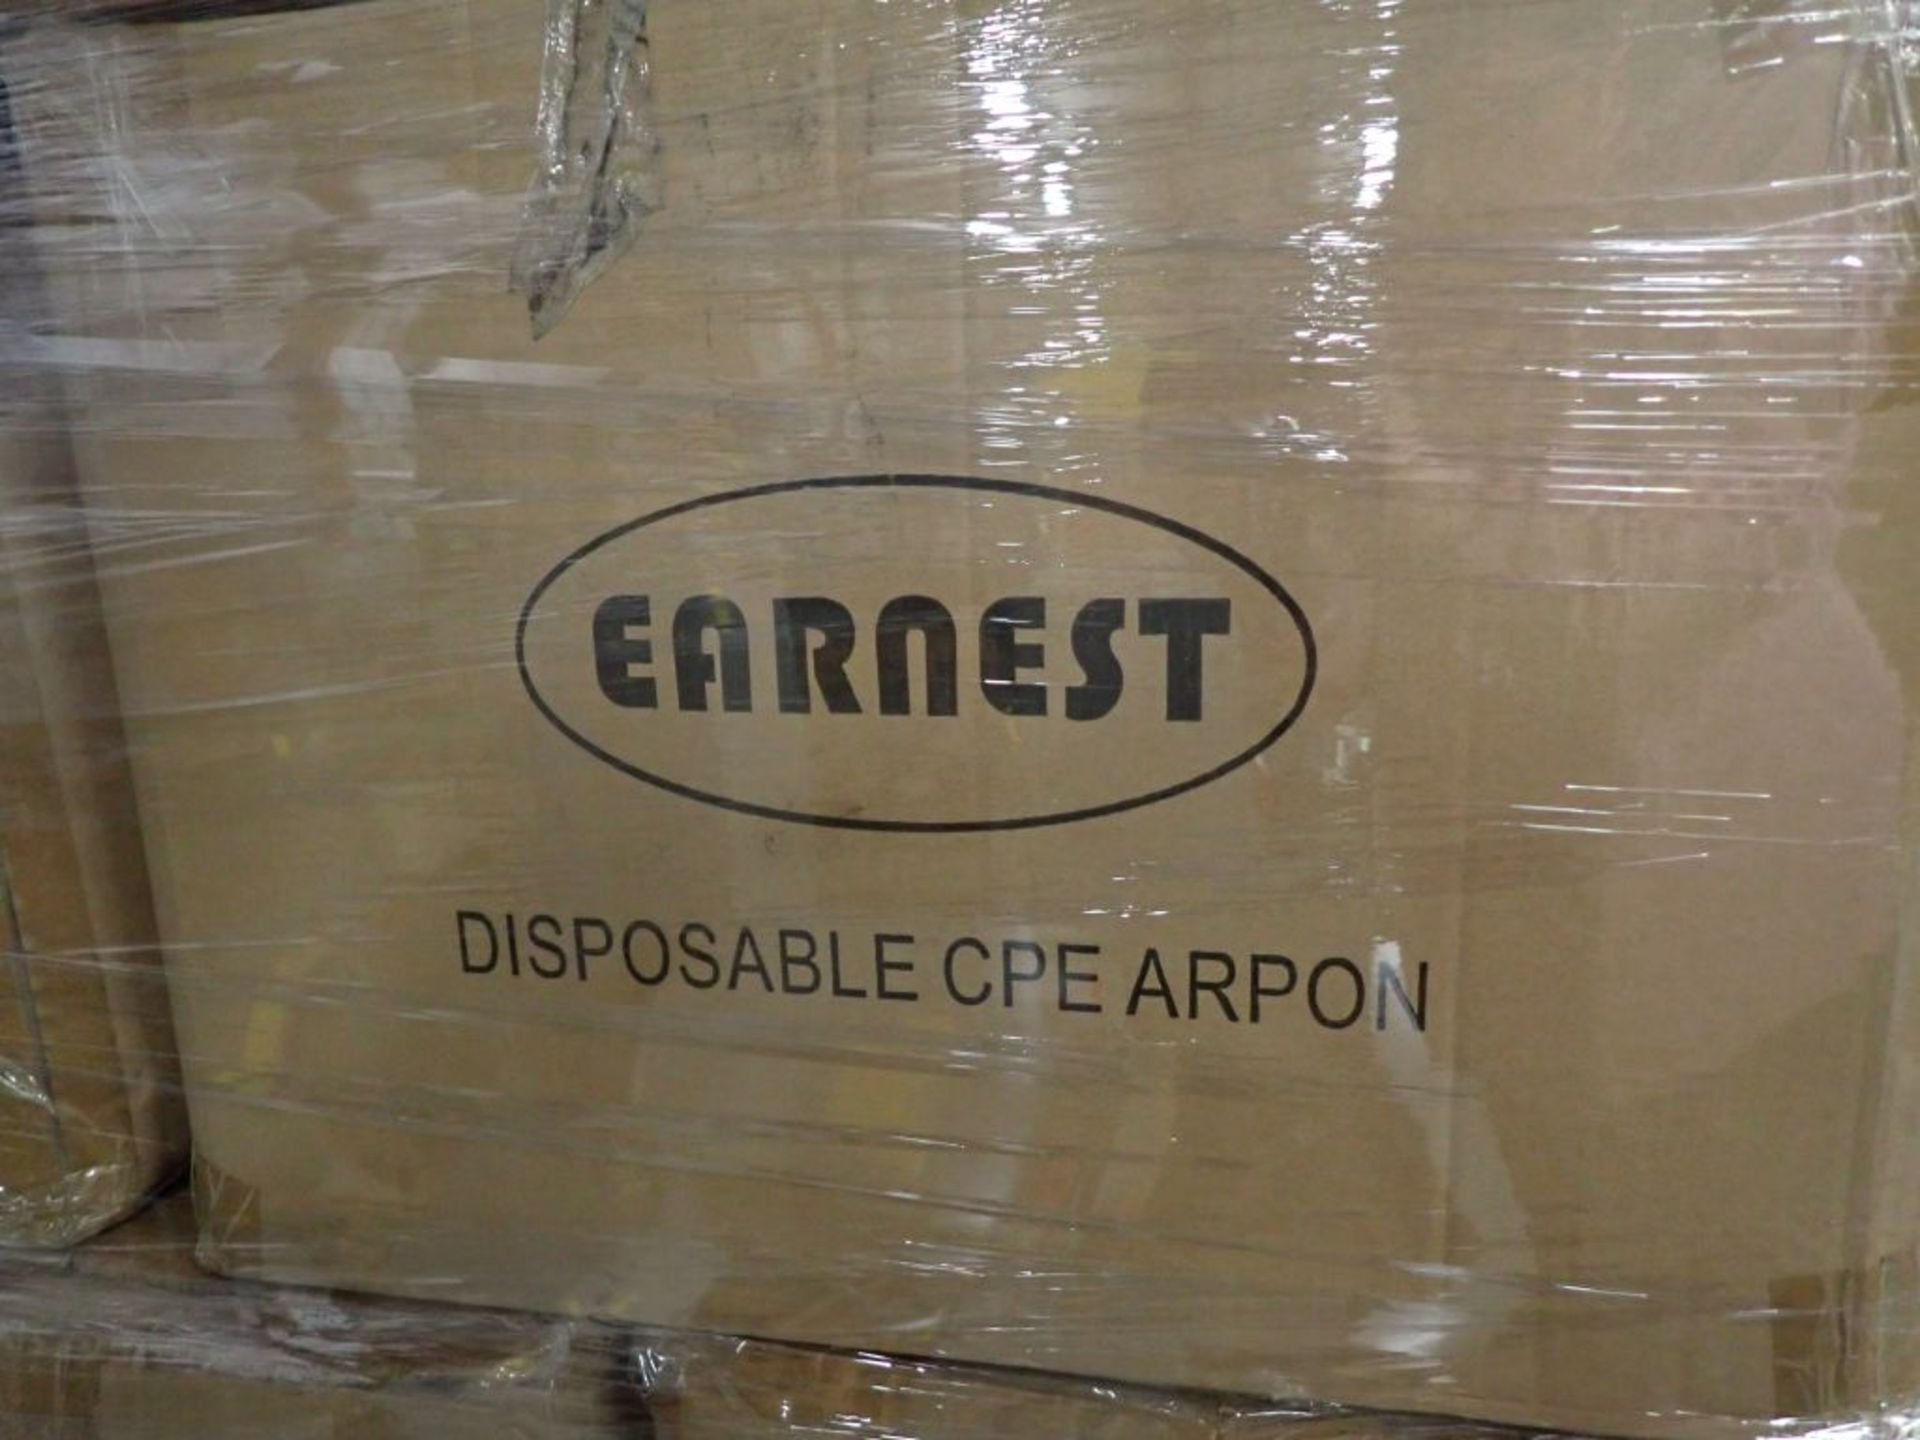 Lot of (6,400) Earnest Disposable CPE Aprons - Image 3 of 5